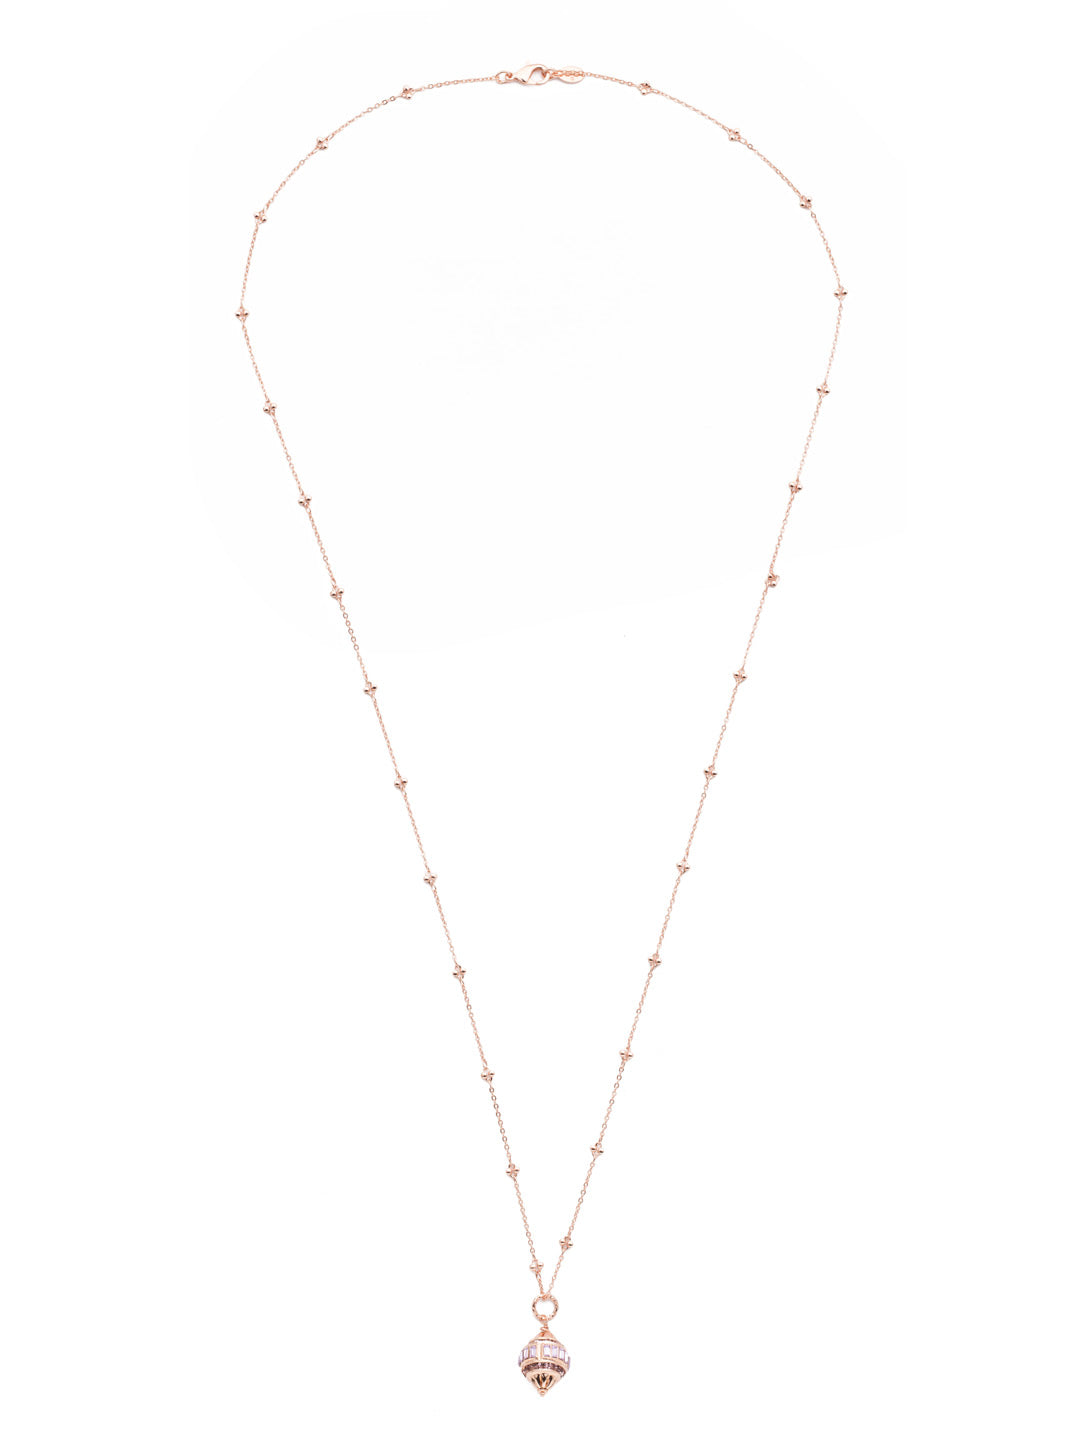 Lola Pendant Necklace - NEN14RGLVP - The Lola Pendant Necklace dangles something completely unique and sparkly front and center, accented by smaller gems on a delicate chain. Make it the special standout piece in your jewelry collection. From Sorrelli's Lavender Peach collection in our Rose Gold-tone finish.